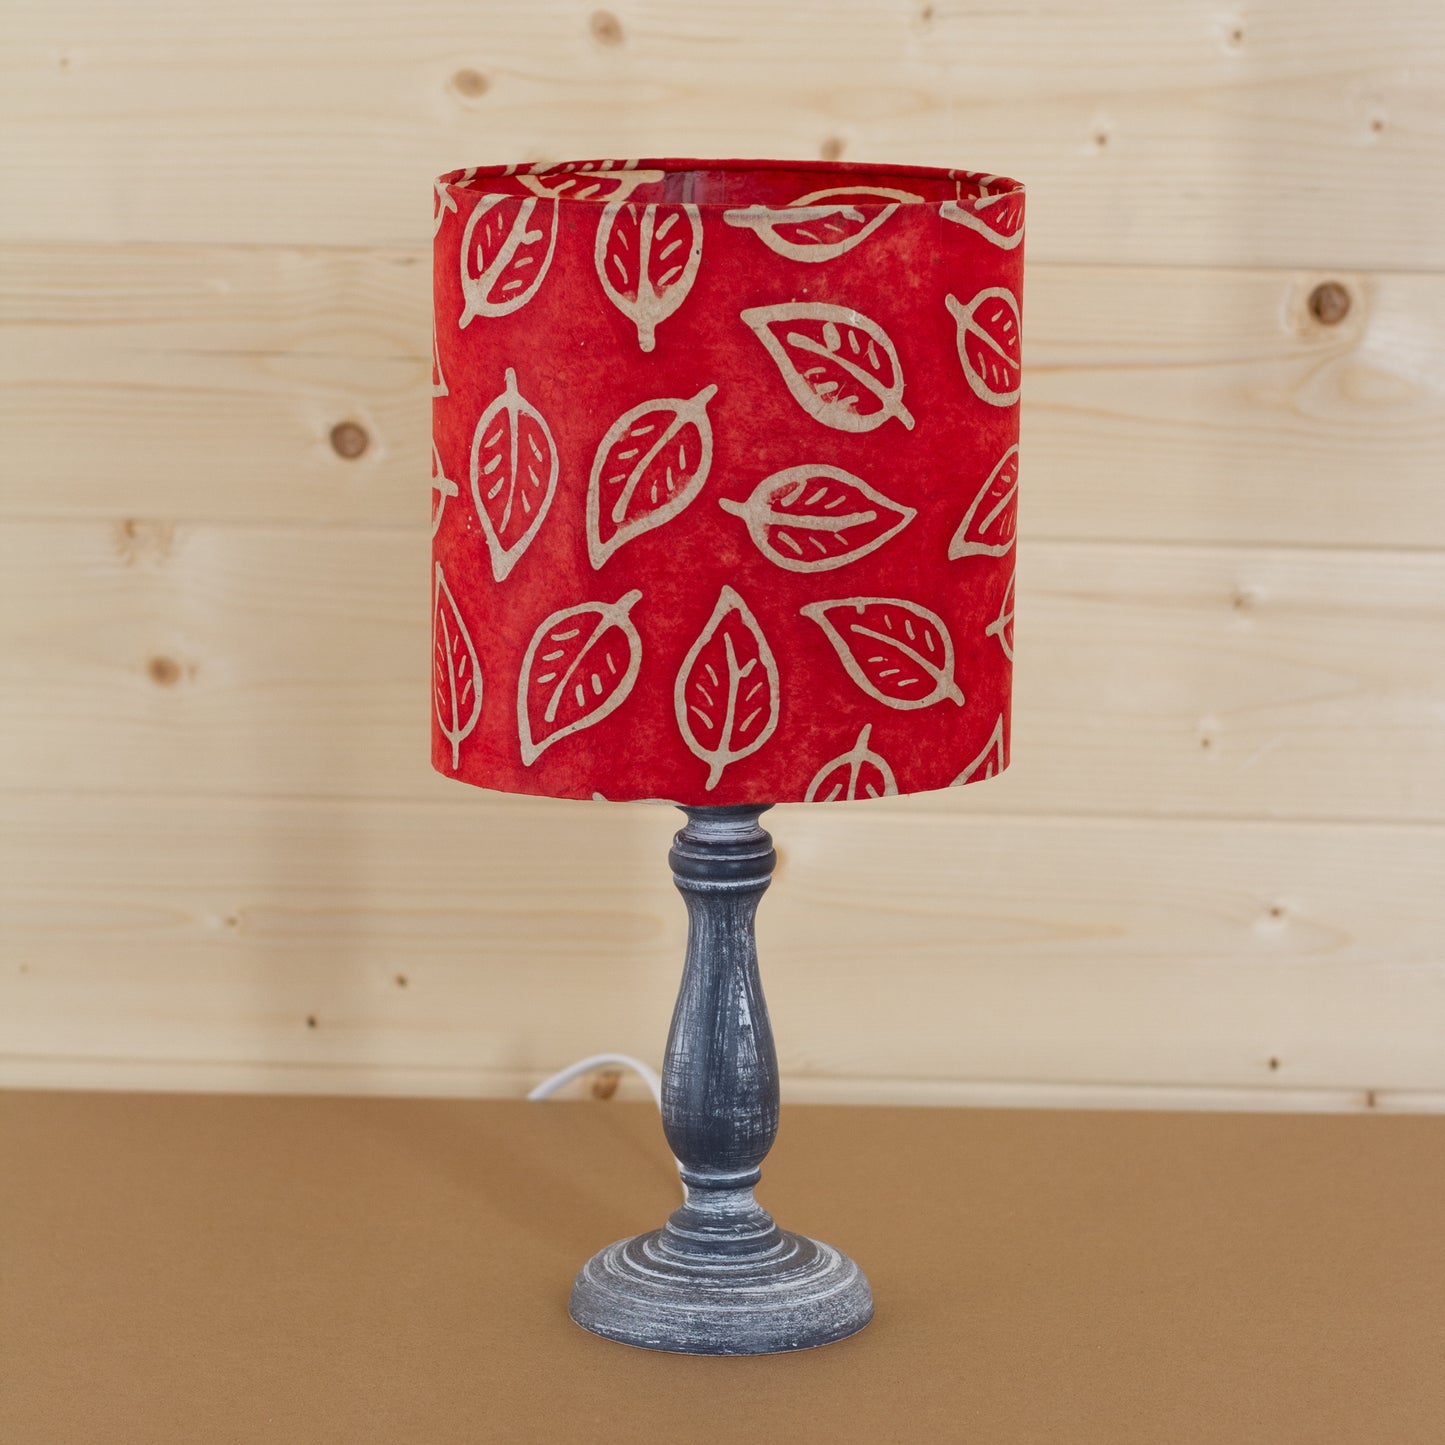 Paros Wooden Table Lamp with a Oval Shade in P30 - Batik Leaf on Red